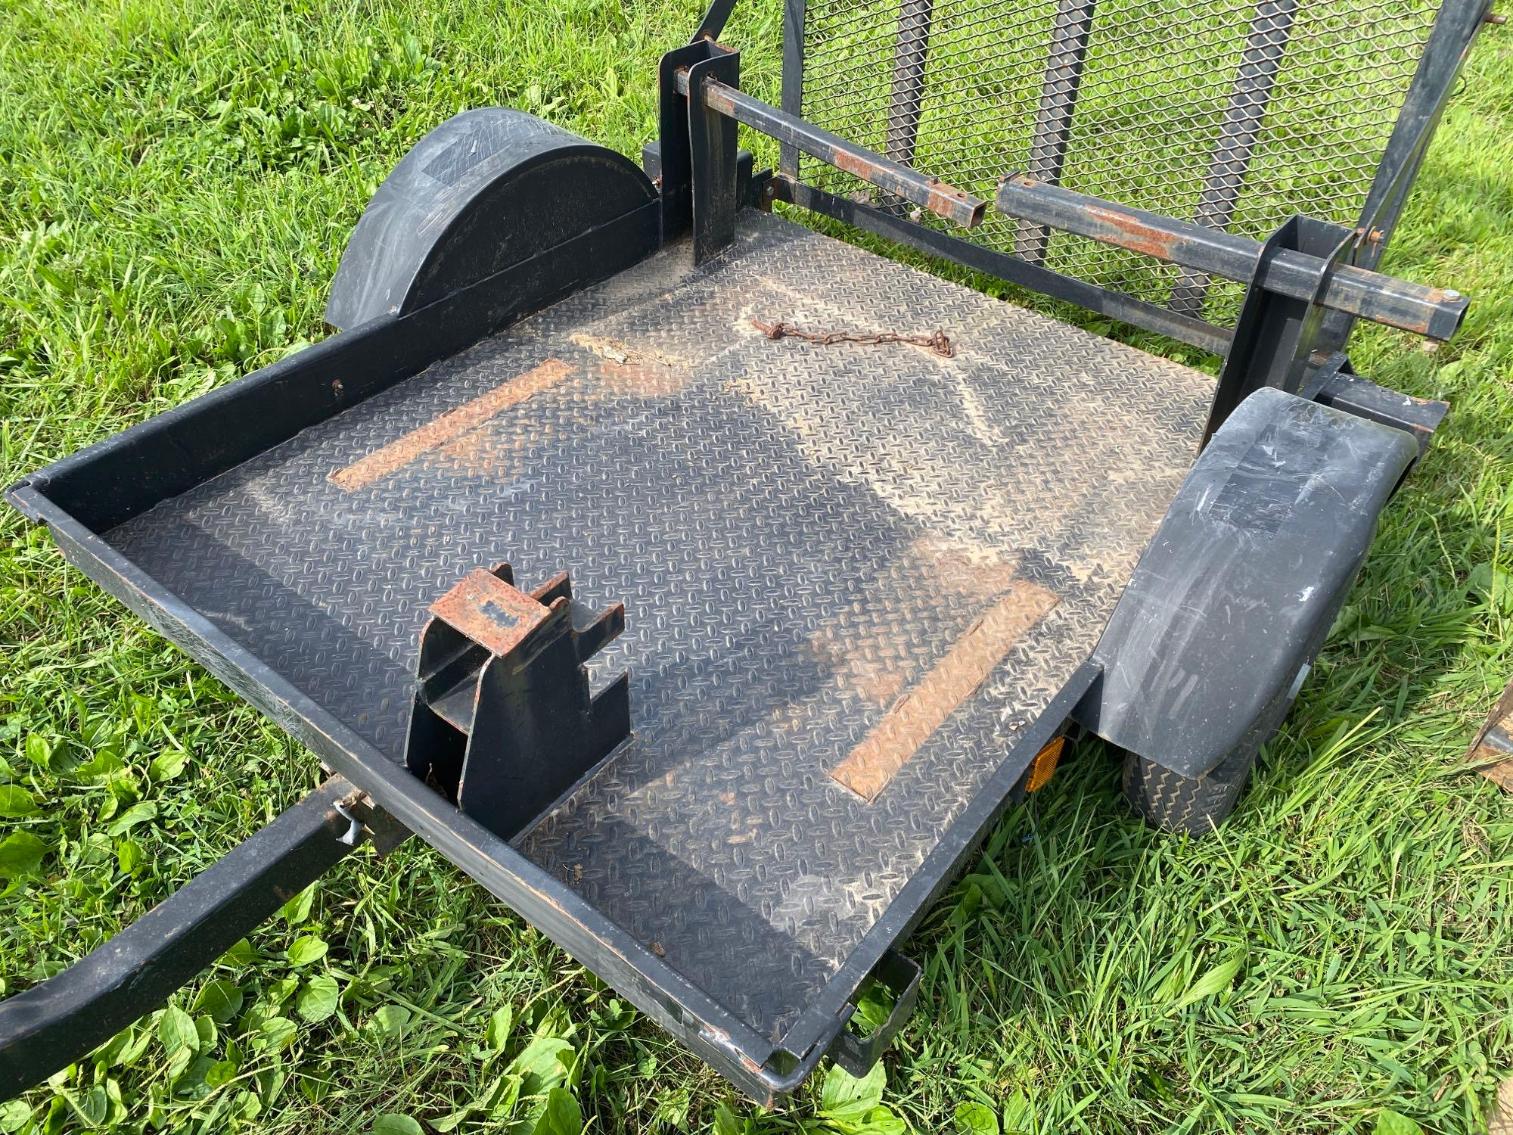 Image for 4' x 5 ' Utility Trailer, Per Seller Needs Lights, Was Previous Stump Grinder Trailer- NO TITLE